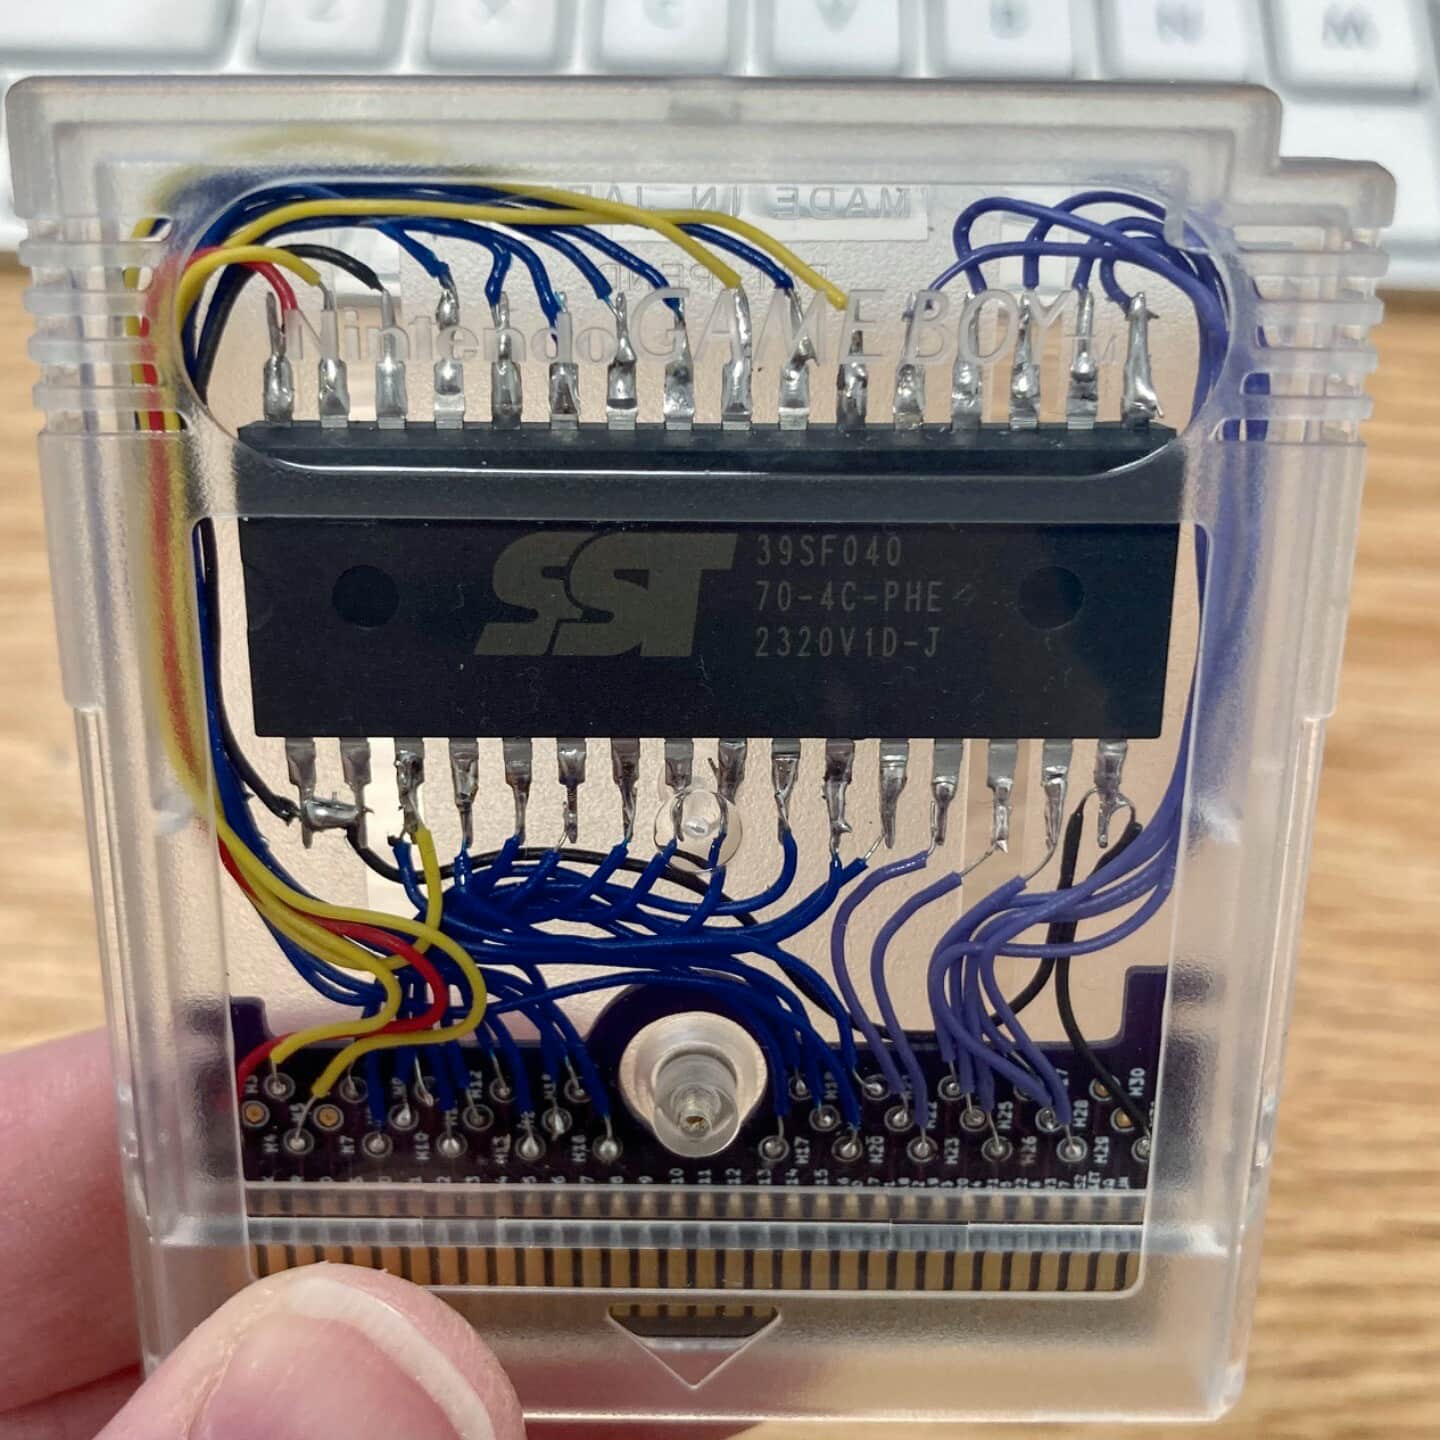 A translucent Game Boy cartridge, revealing the electronics inside. Numerous wires are soldered directly to the edge connector and flash chip—dead bug style. Messy but/and beautiful.